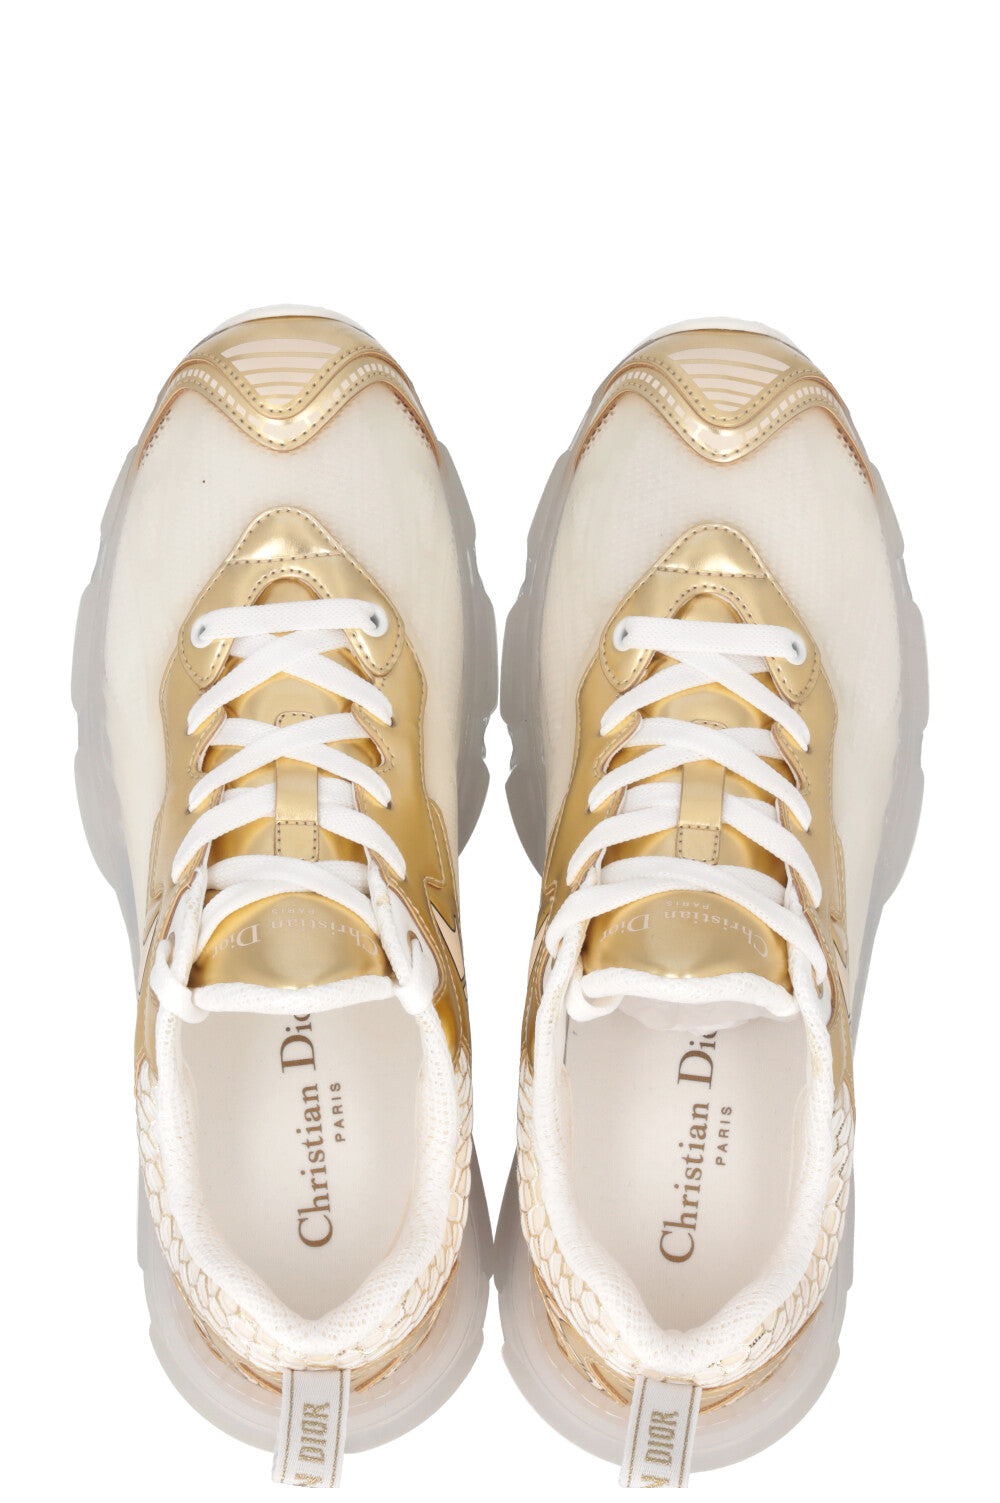 CHRISTIAN DIOR Vibe Sneakers White Gold